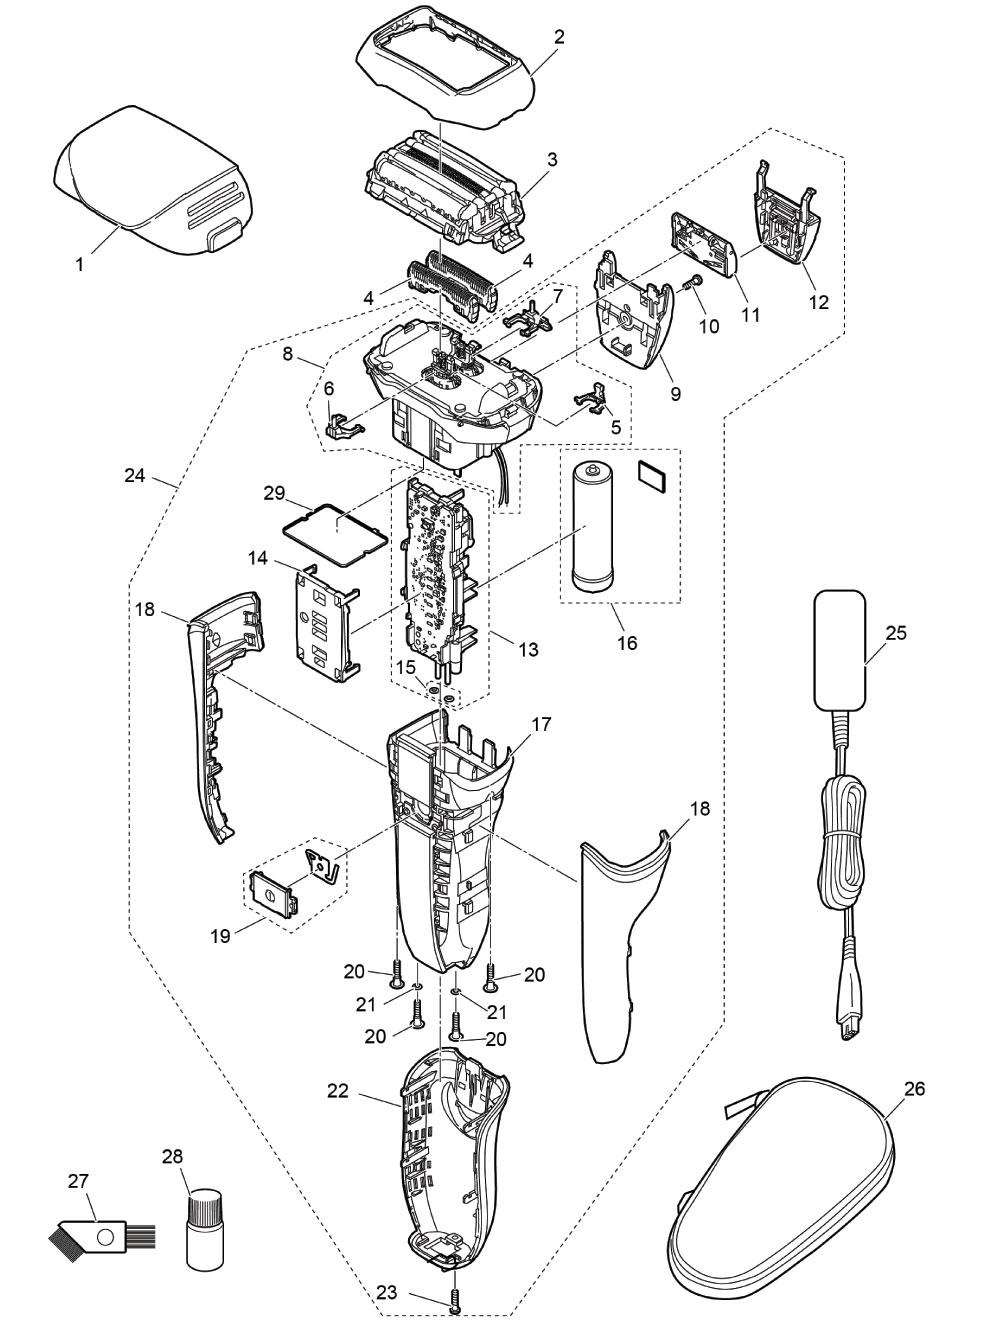 ES-CV50: Exploded View